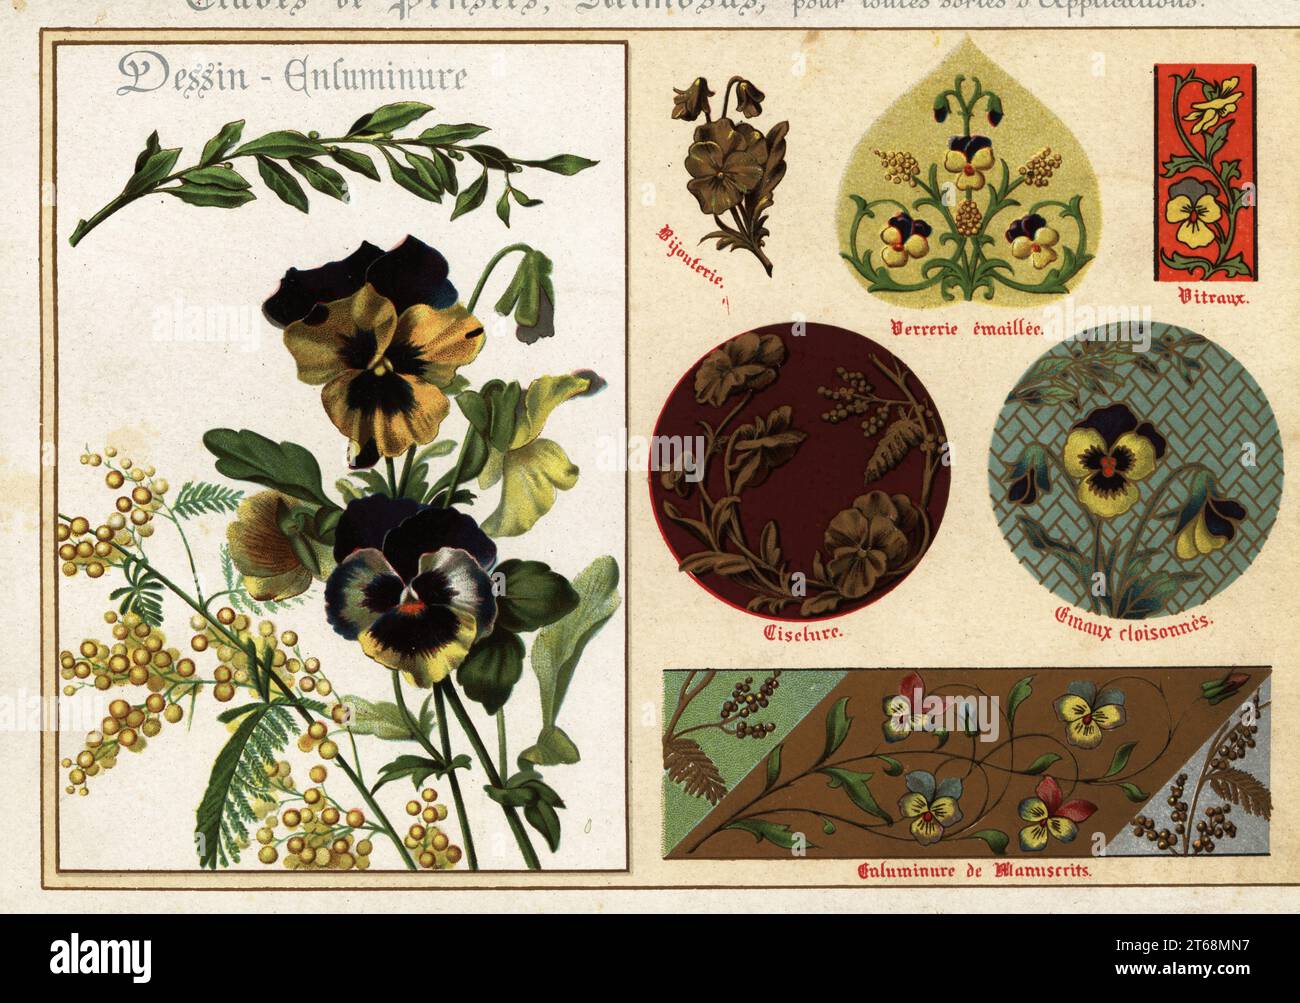 Images of pansies and mimosa from manuscripts and their applications in jewelry, enameled glassware, ciselure, cloissone enamel, stained glass. Chromolithograph designed and lithographed by Ernst Guillot from his Flowers After Nature and Ornamental Flowers, Fleurs d`apres Nature et fleurs ornementales, Paris, 1890. Stock Photo